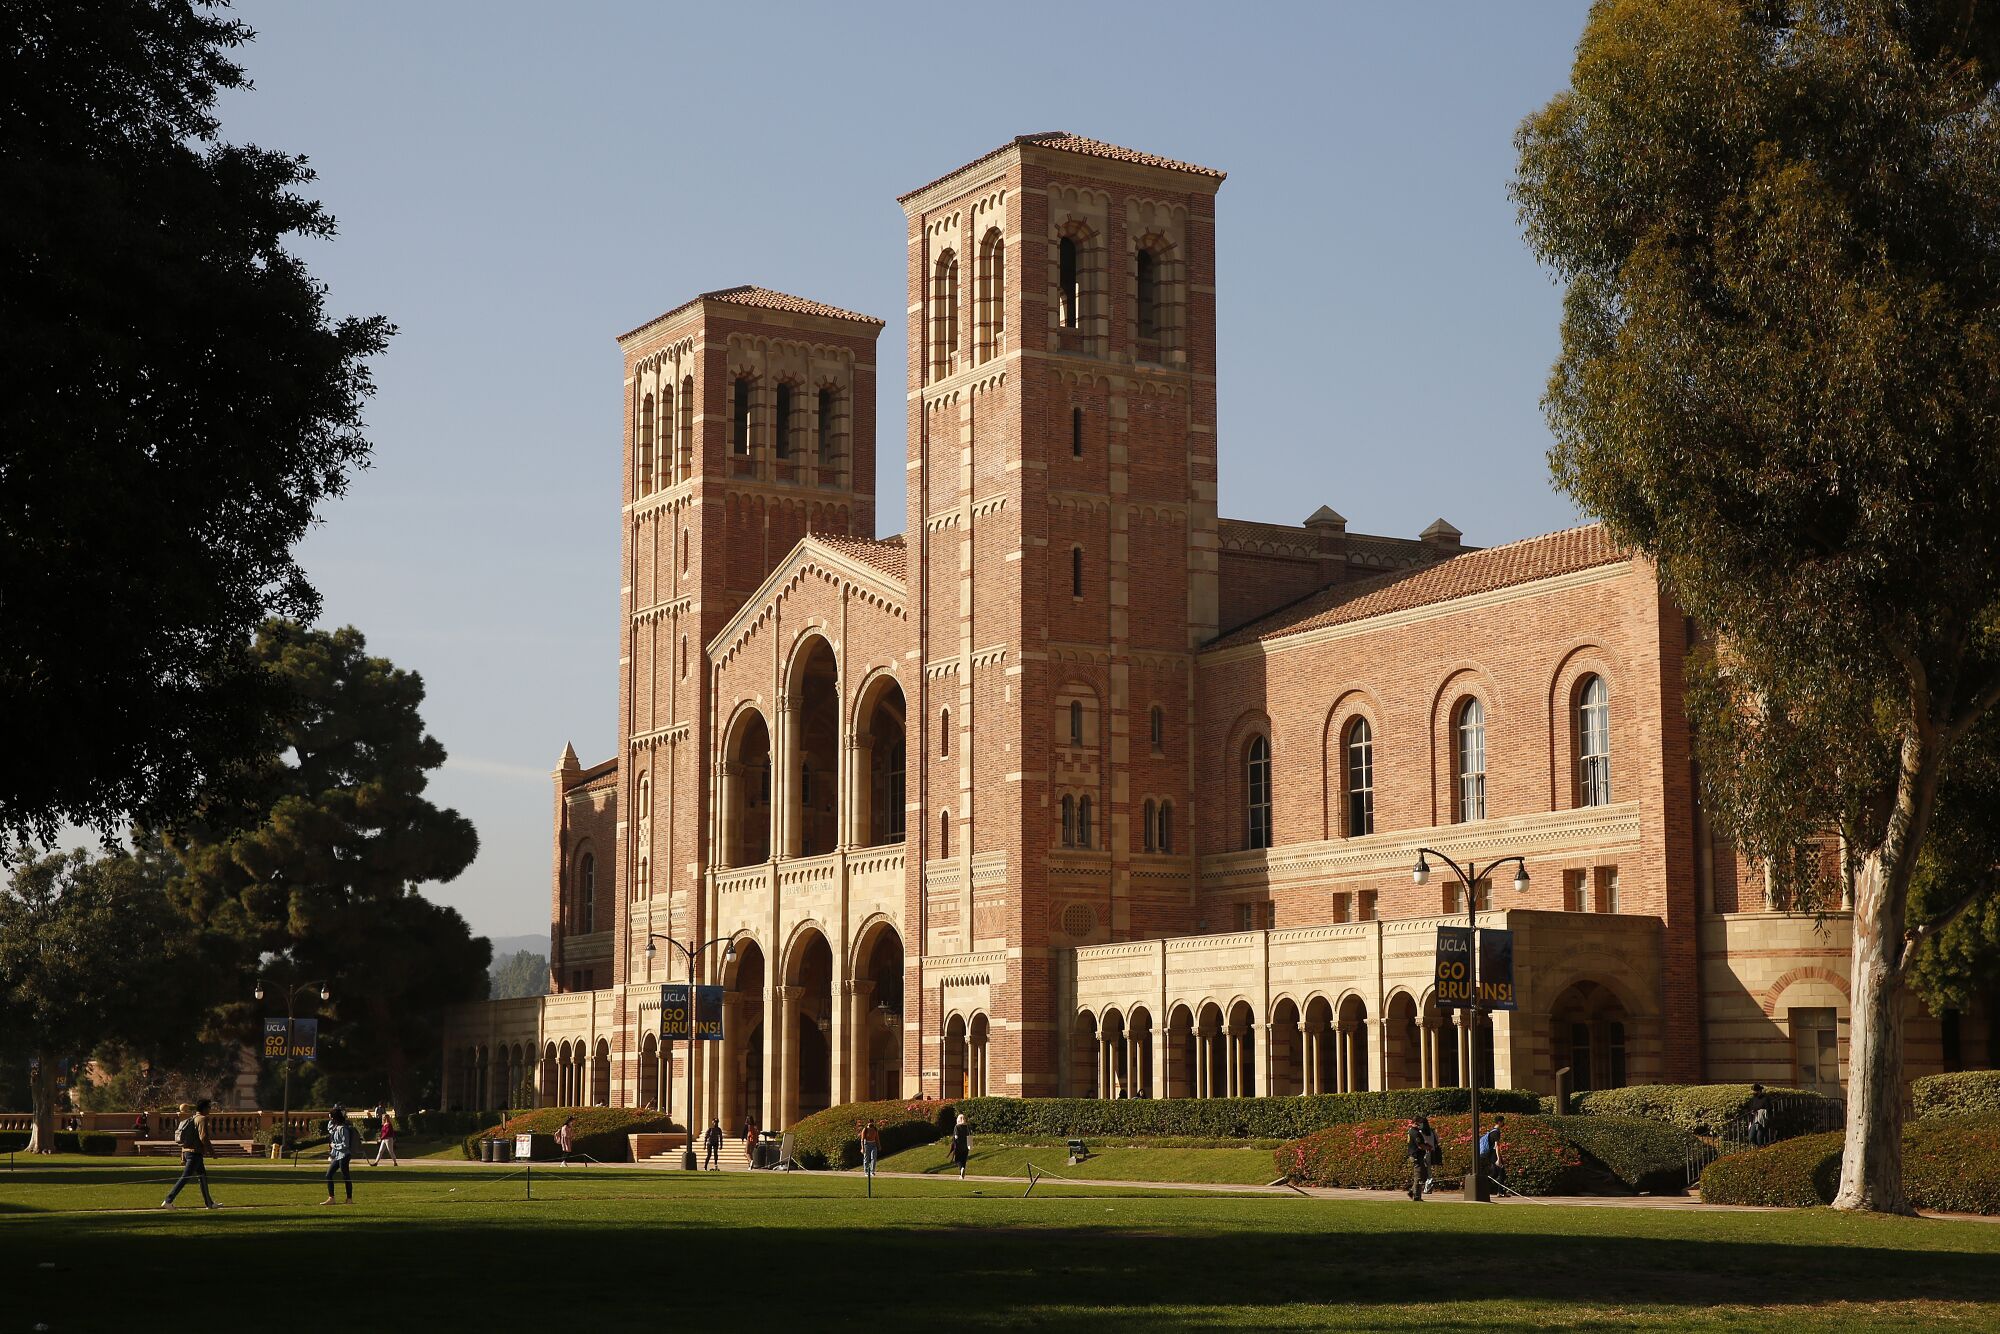 People walk around outside a large building on the campus of UCLA